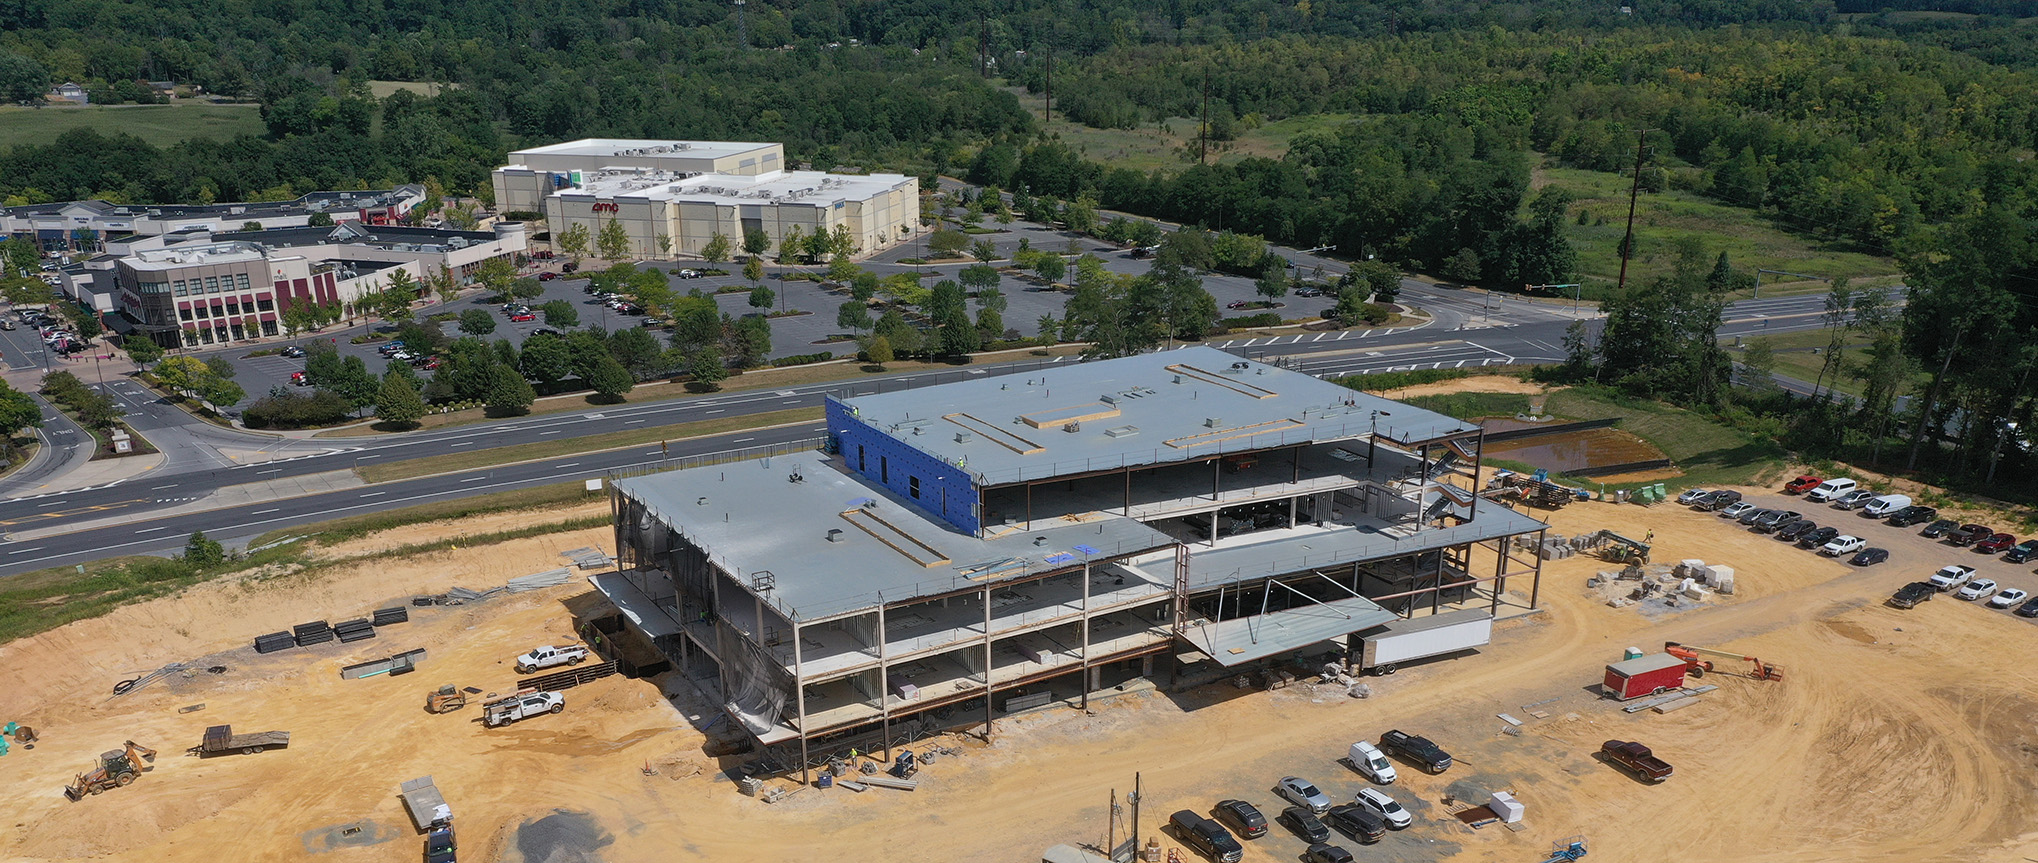 An aerial view of Good Shepherd Rehabilitation Hospital under construction featuring the exterior metal framing of the building